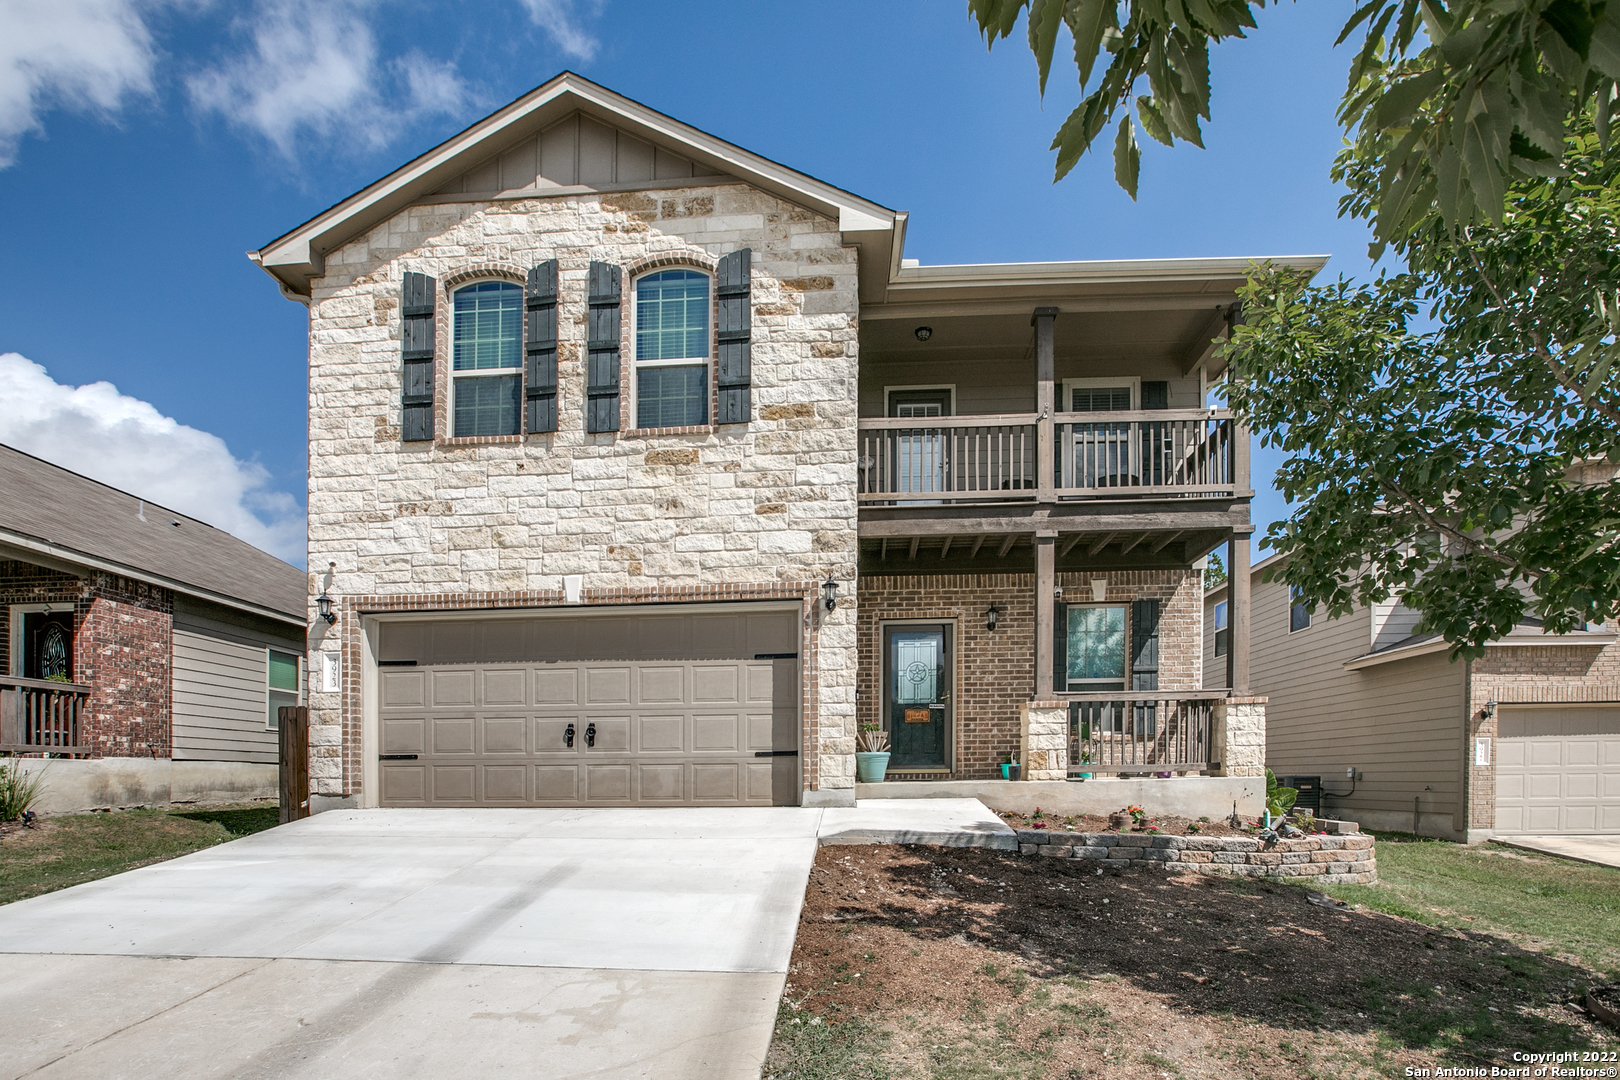 This 2642 sq. ft. living home is located in the a fast growing area of San Antonio in the Brooks City Base area.  This beauty has to many upgrades to list such as wrought iron railings, granite countertops throughout, upgraded shower in the master retreat, and 3 ft eXtension in the garage to fit a full size truck which in turn extends the master bedroom.  Home is located in a cul de sac and very close to grocery stores, shopping, river walk and many new and emerging dining options. This home is within walking distance to Highland Forest Elementary and close proximity to University of Incarnate Word school of Osteophathic Medicine. Sellers may need a short term leaseback.   A MUST SEE!!  OPEN HOUSE THIS SUNDAY JUNE 19, 2022 FROM 11AM TO 2PM.